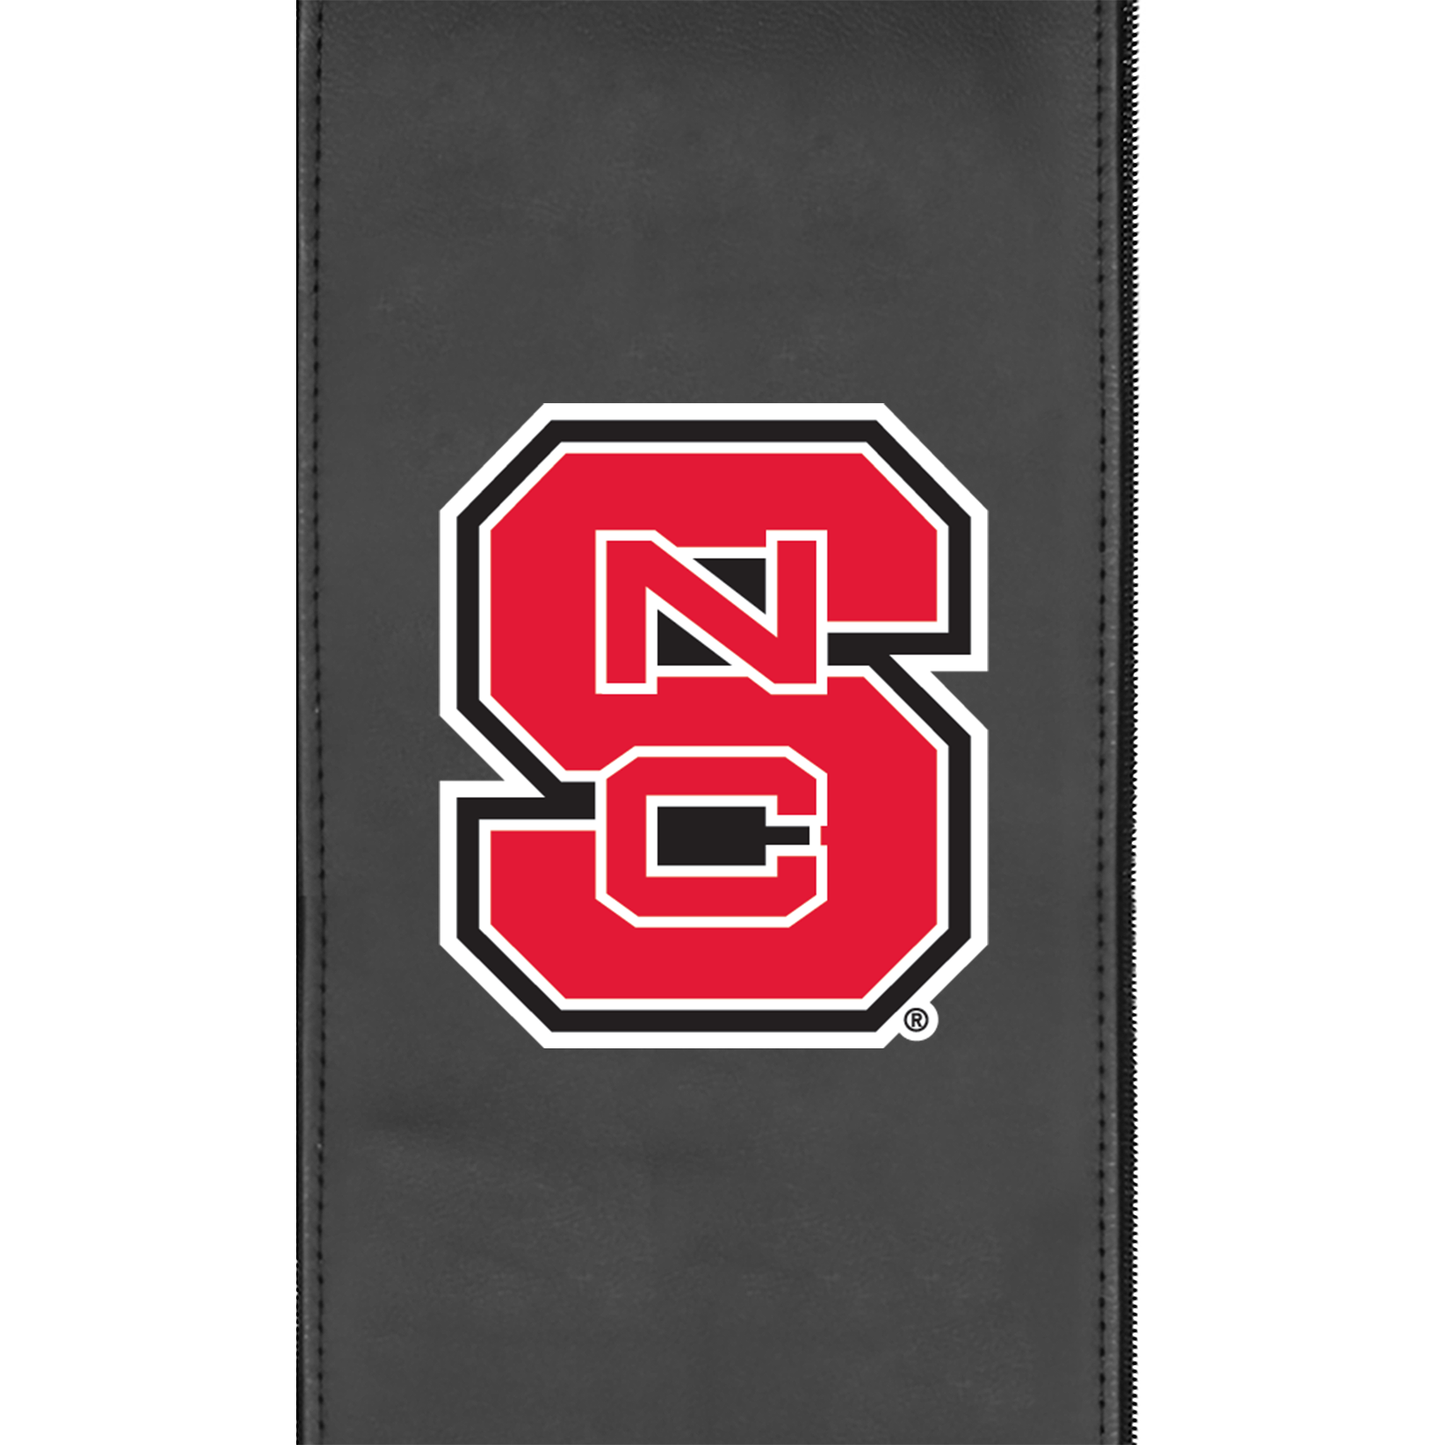 Stealth Power Plus Recliner with North Carolina State Logo